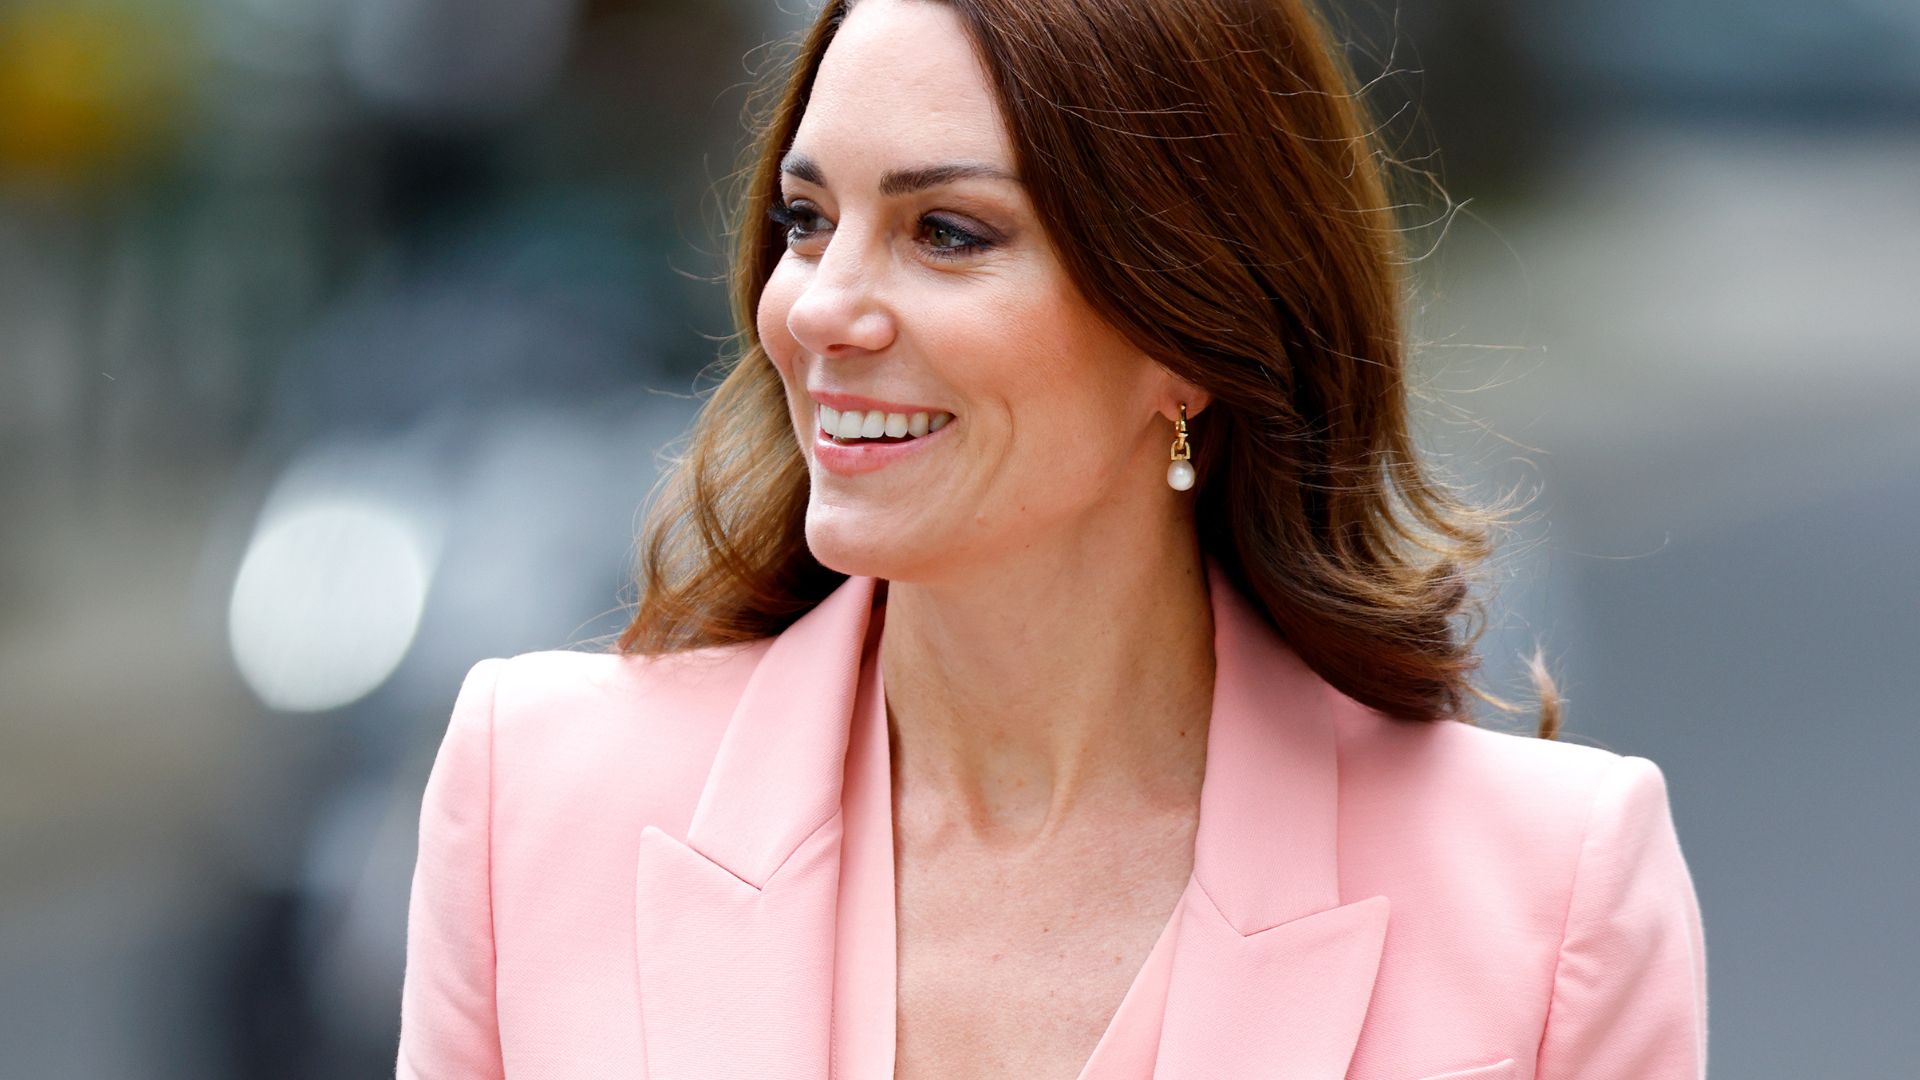 In a rare display, Kate Middleton wore a bright orange…